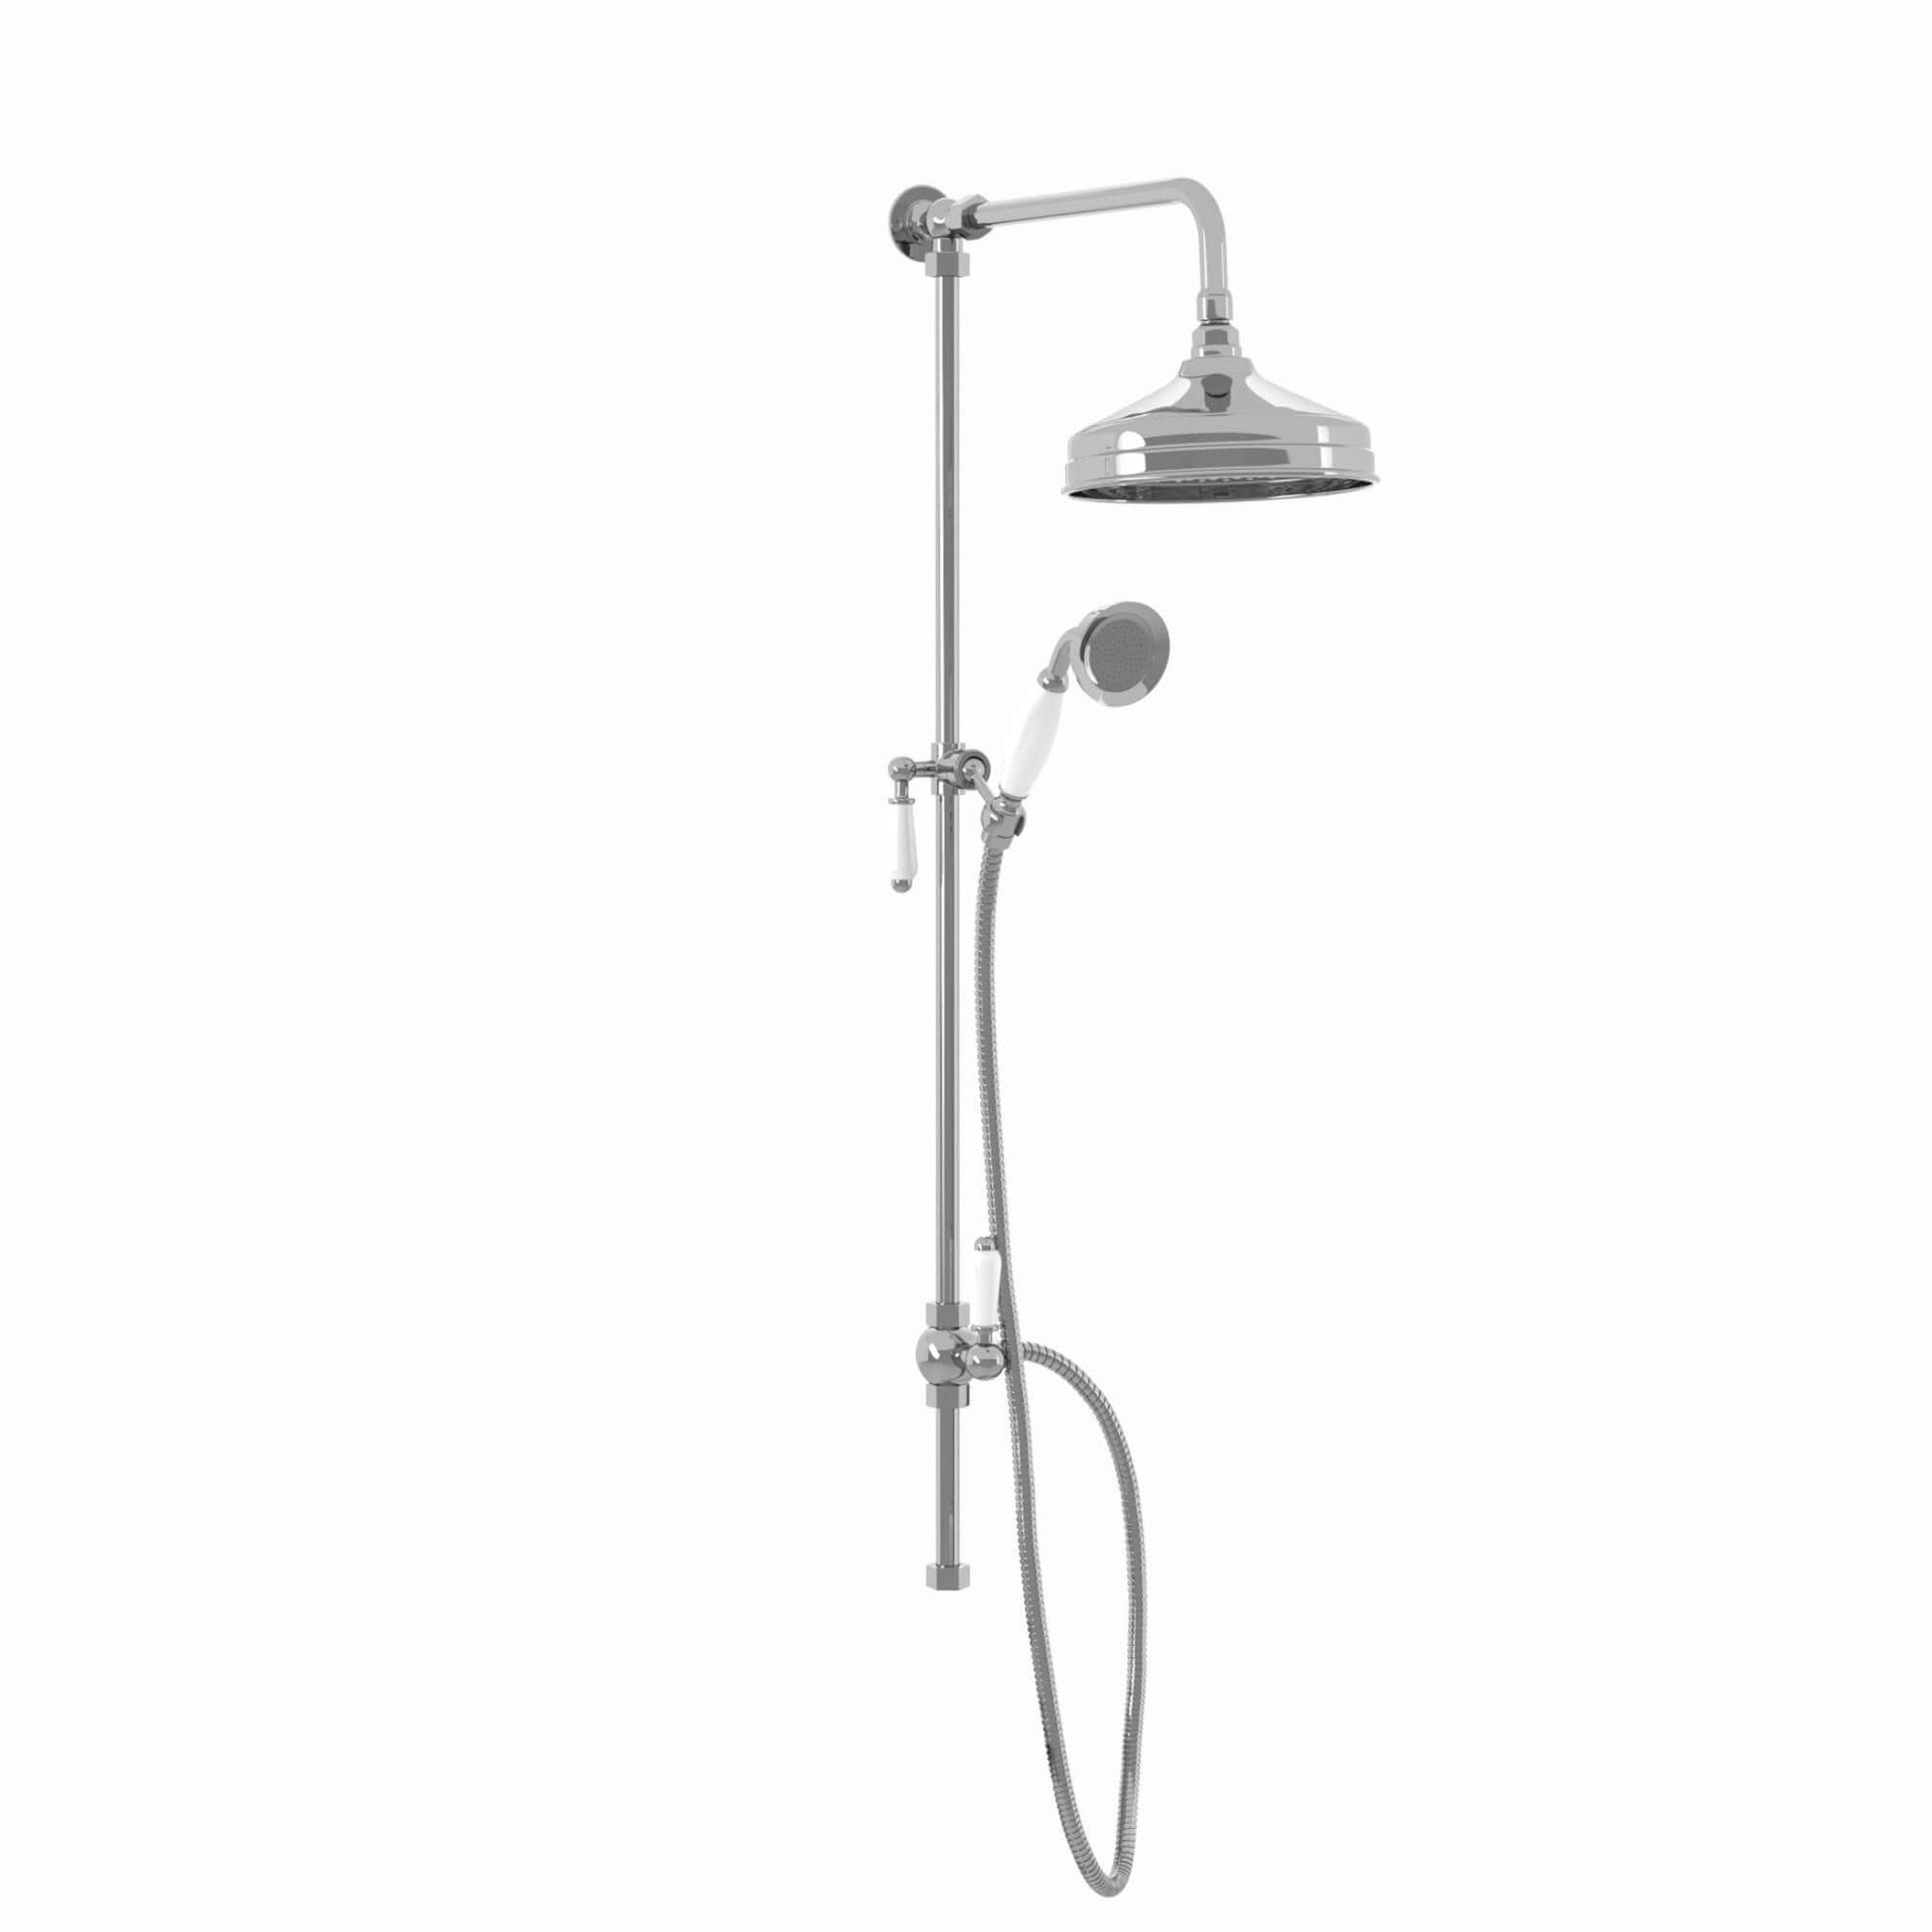 Downton traditional shower riser rail kit 2 outlet watercan head 200mm - chrome - Showers